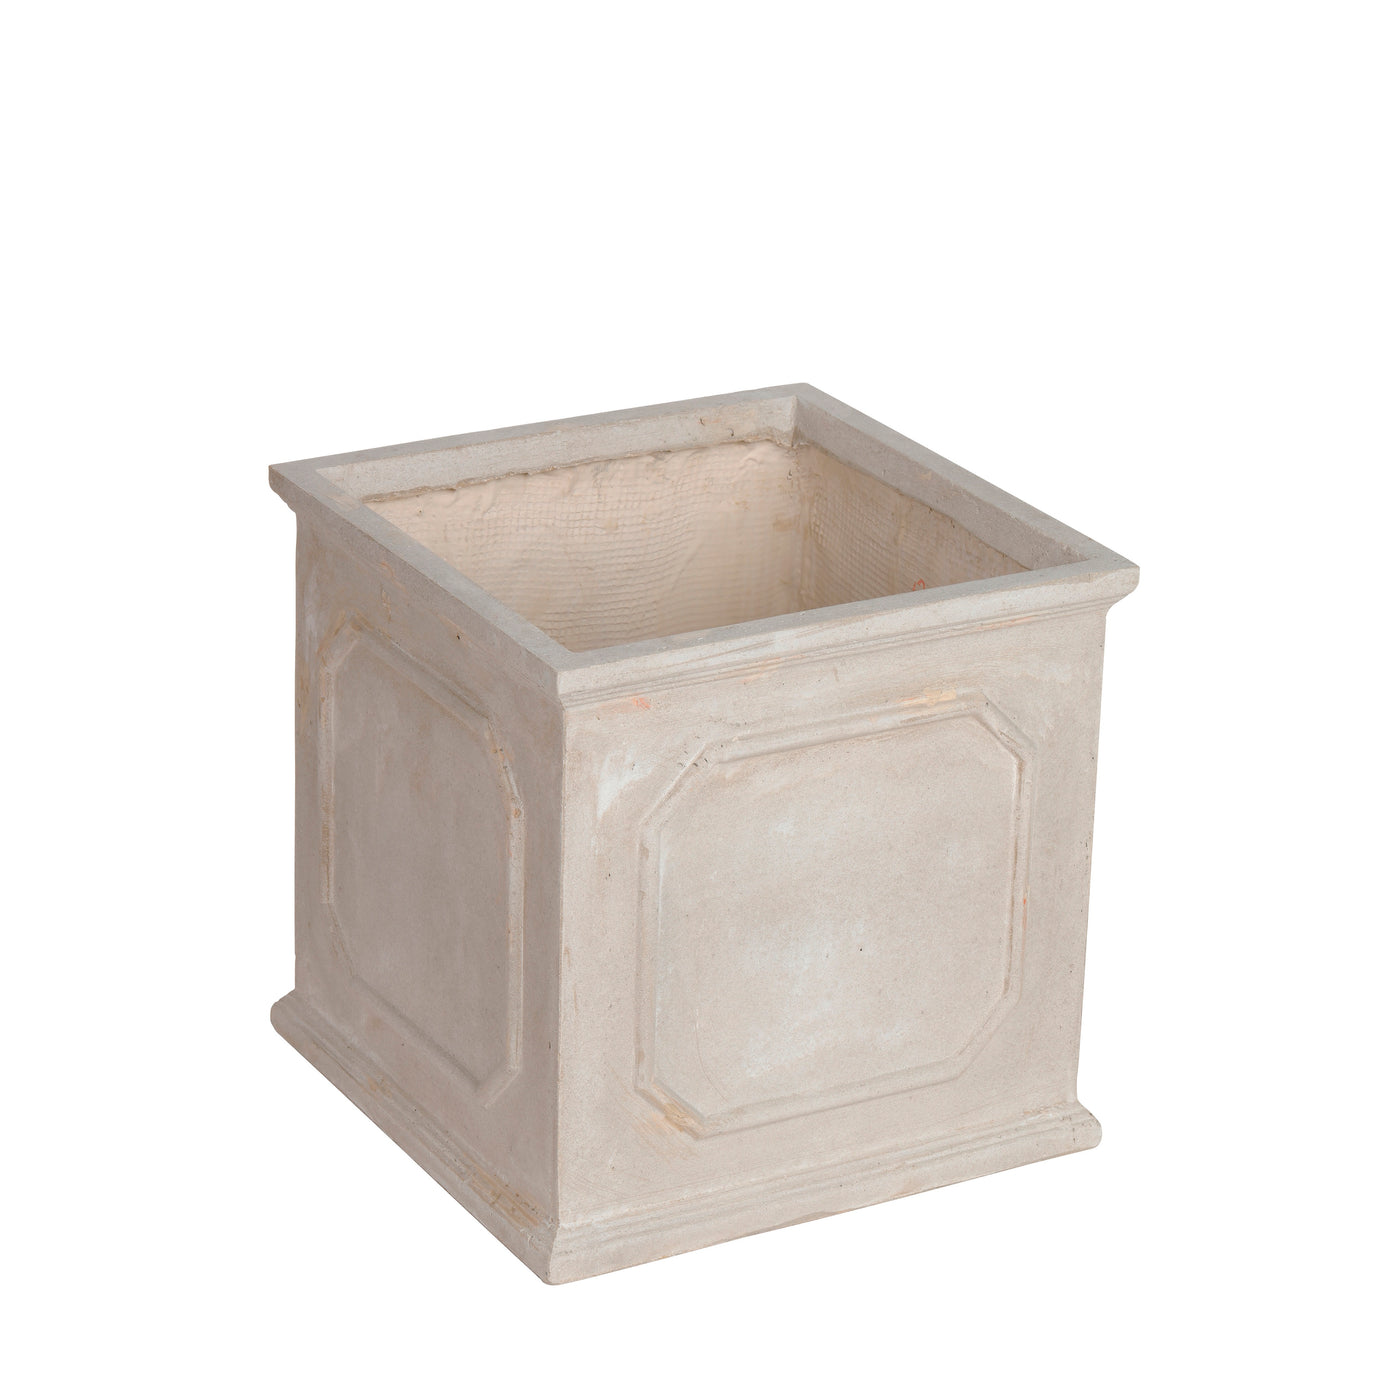 Square stonecast planter with traditional clipped corner panel in natural taupe